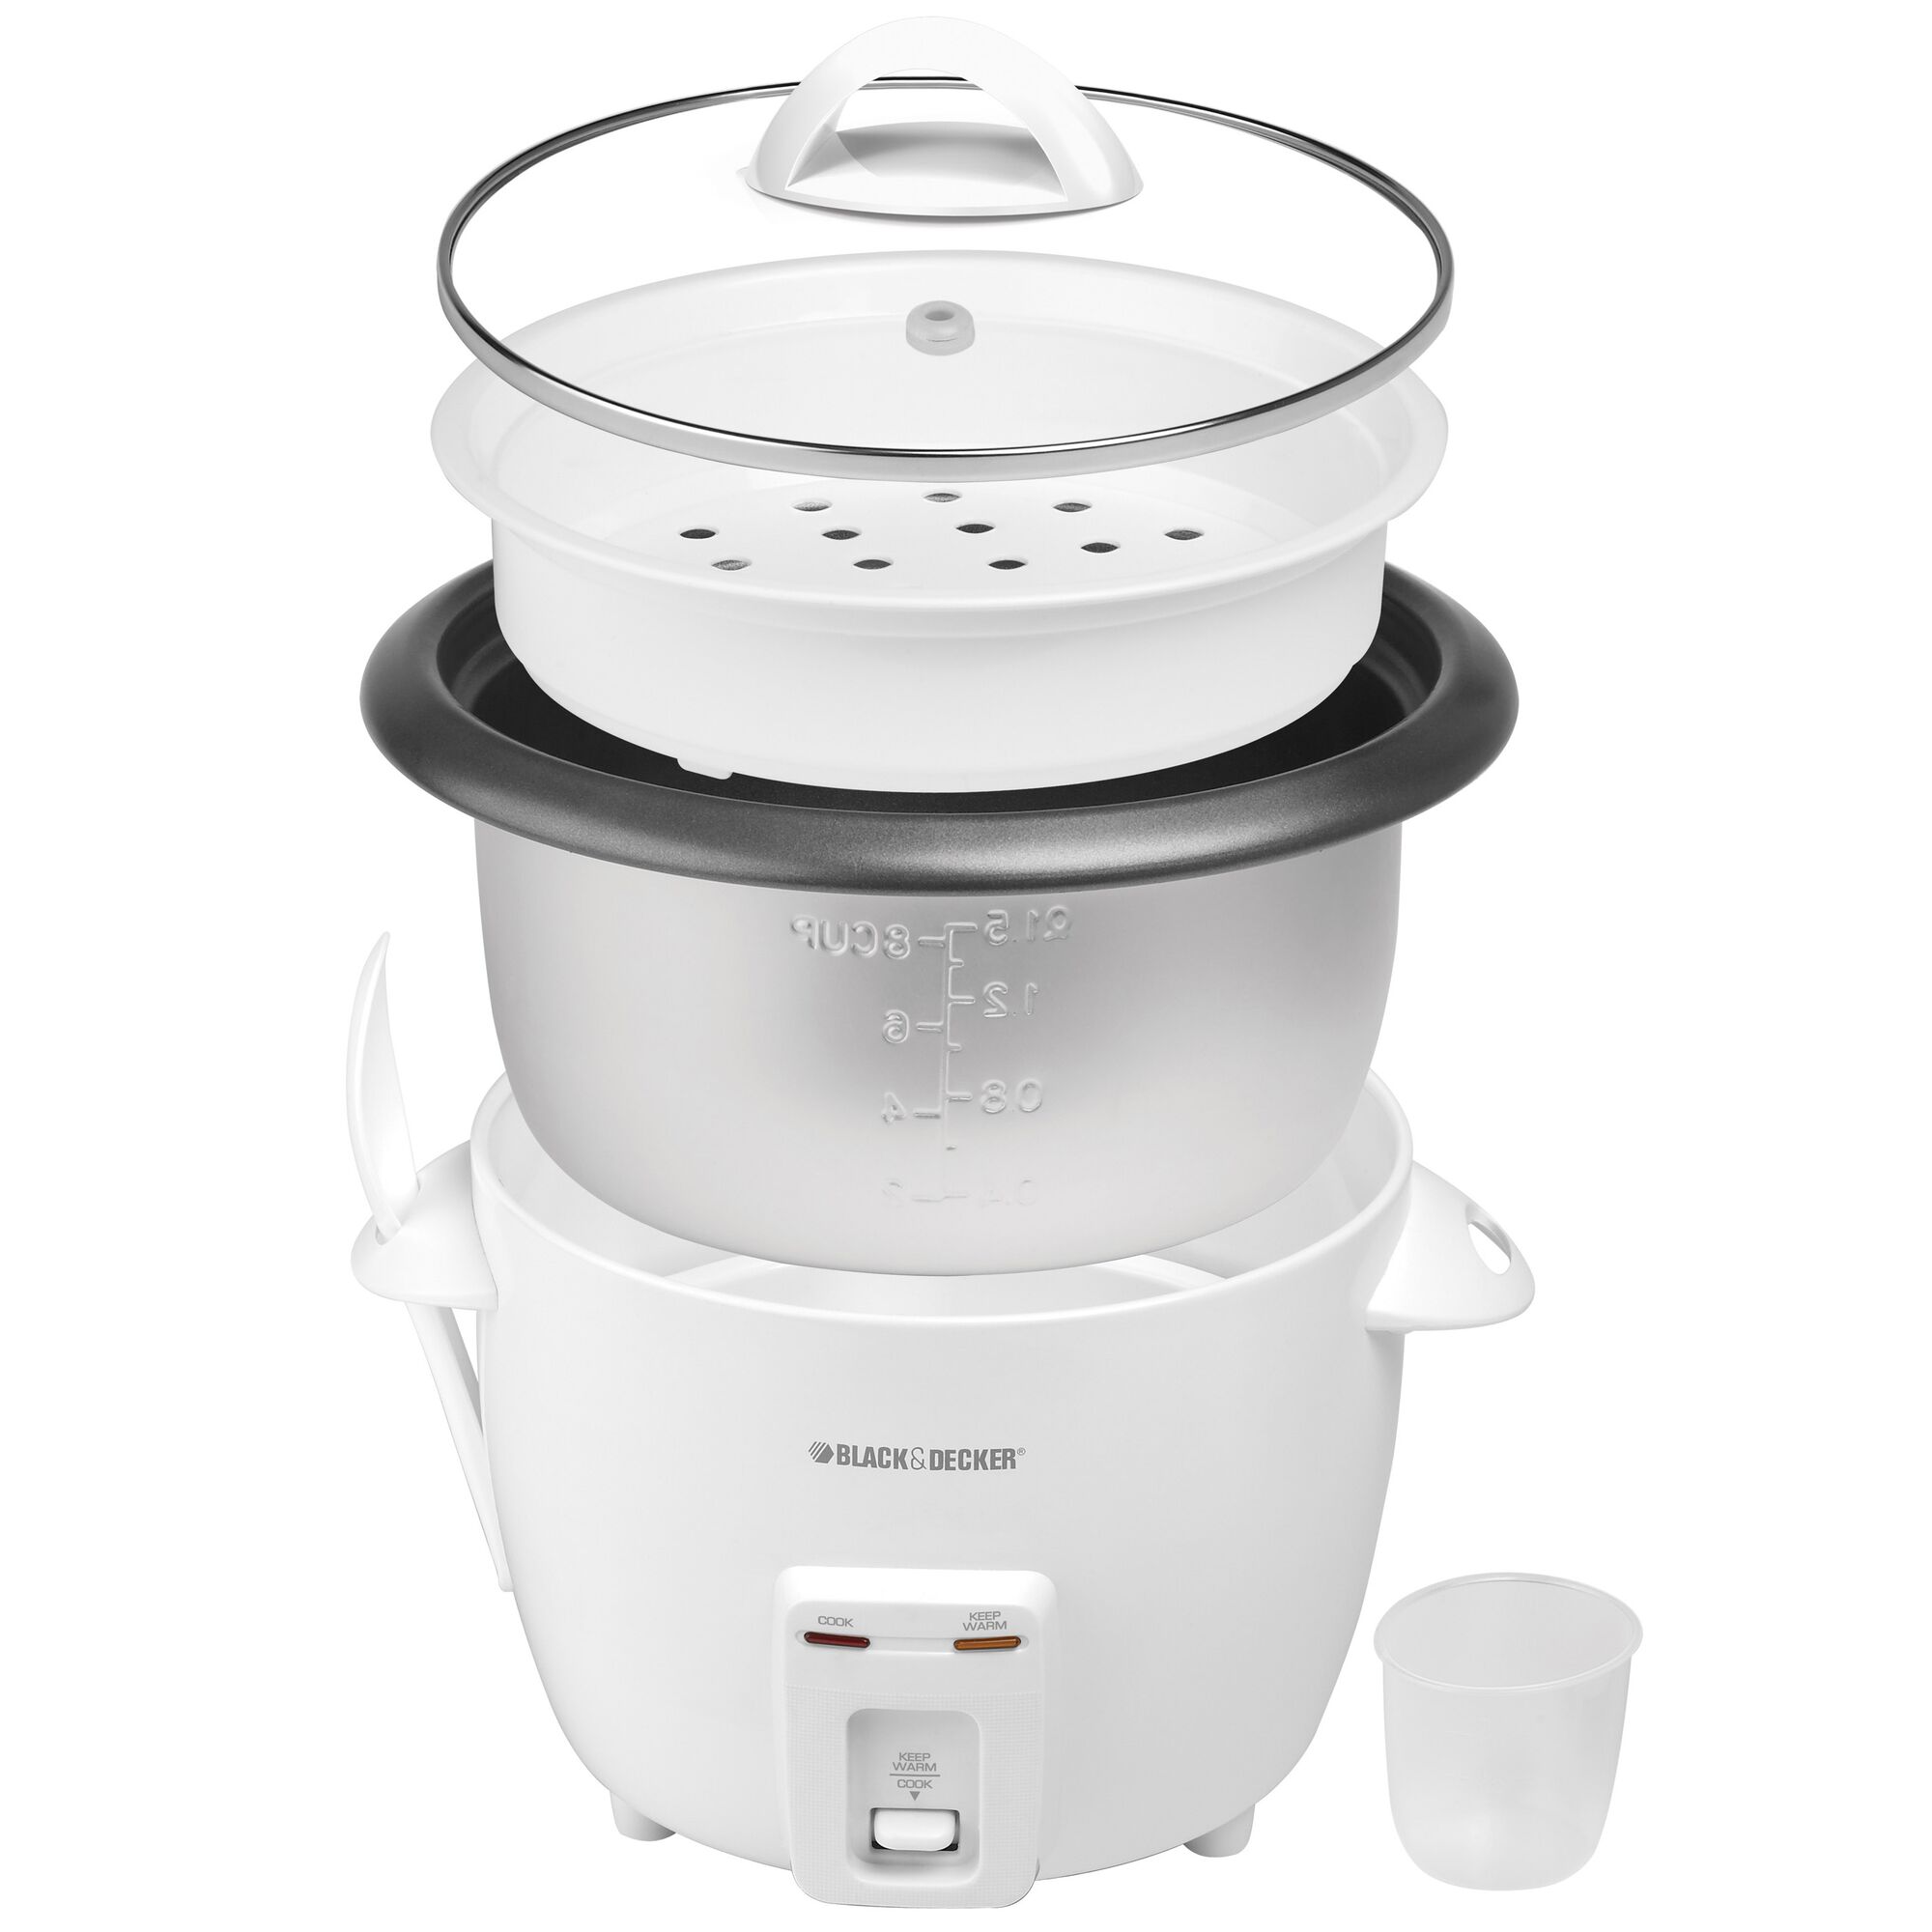 Profile of the BLACK+DECKER 14 cup rice cooker kit components